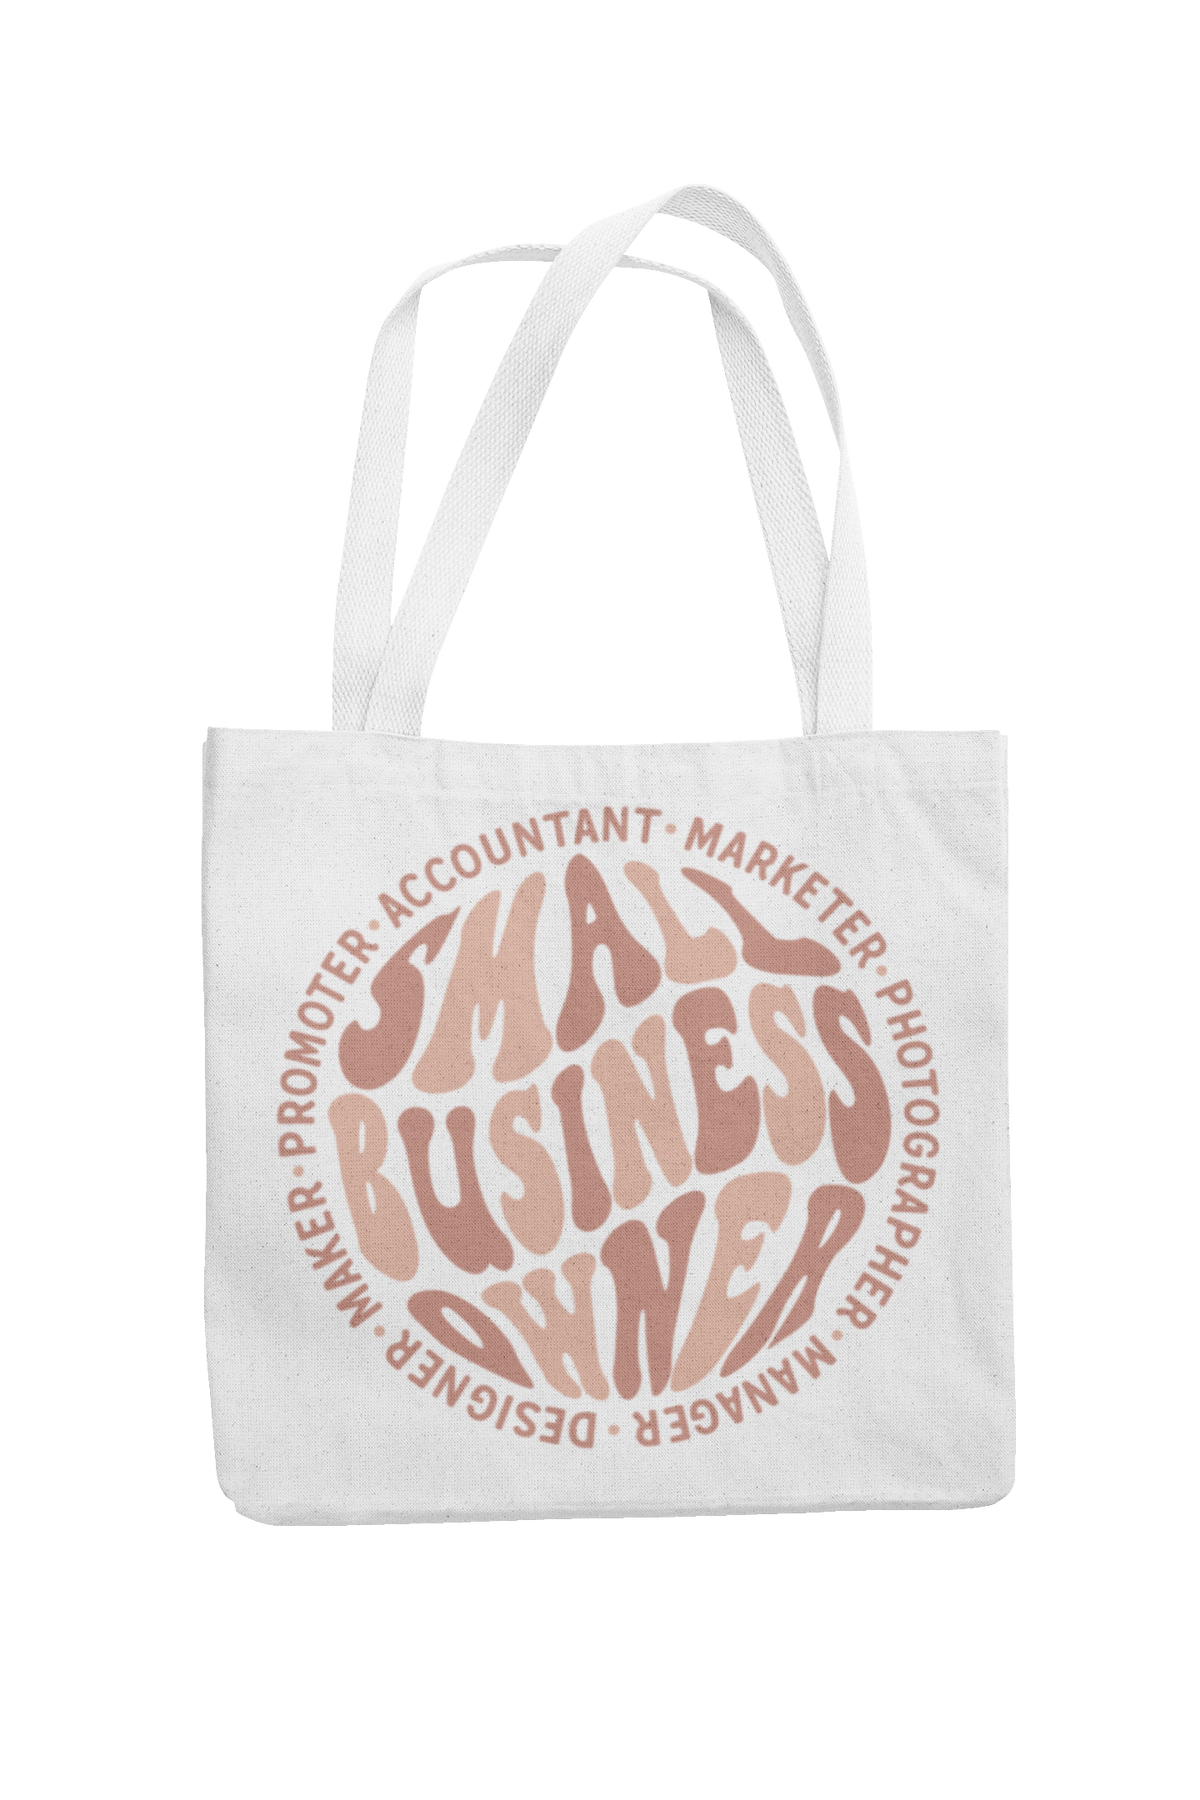 Small business owner - Tote bag